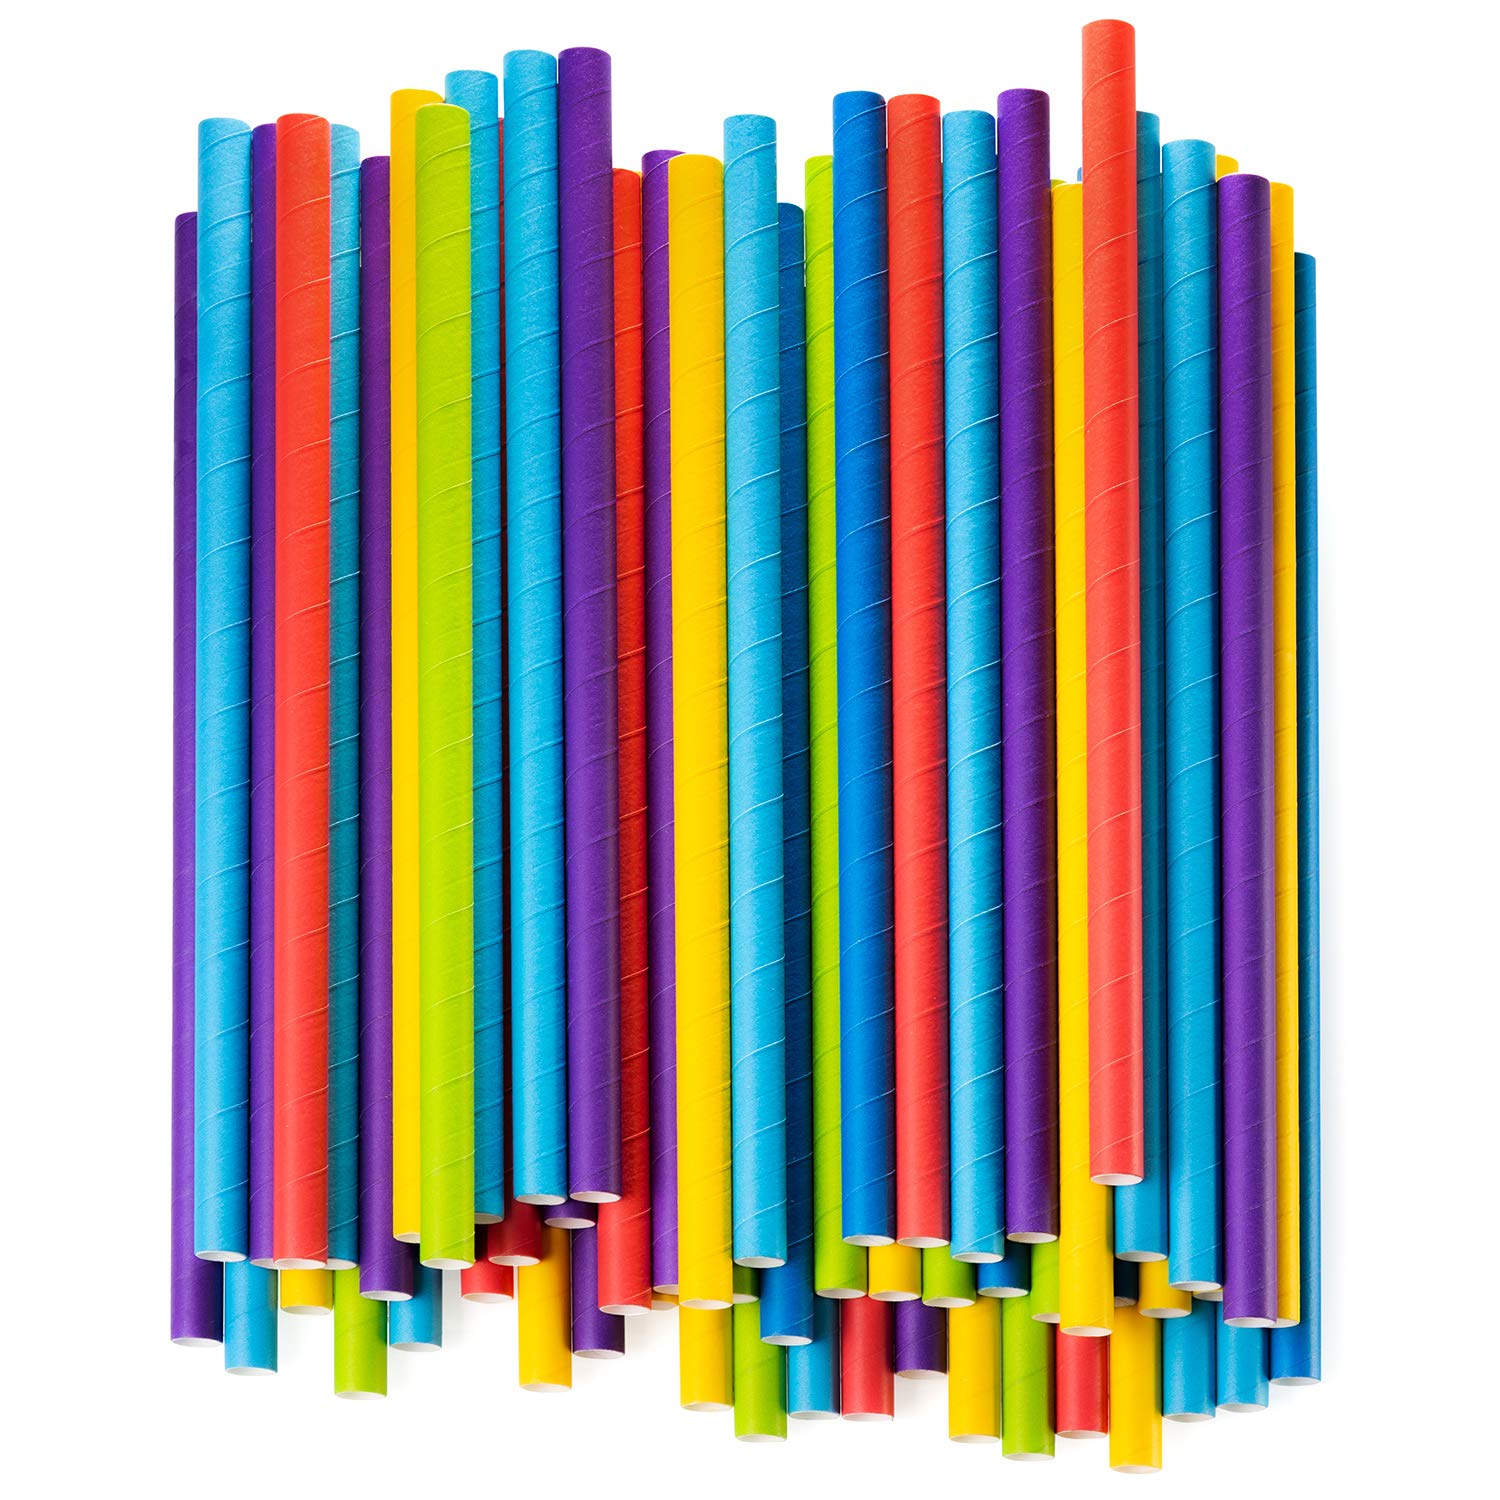 Comfy Package [Case of 2,000] Paper Jumbo Smoothie Straws,100% Biodegradable - Assorted Colors